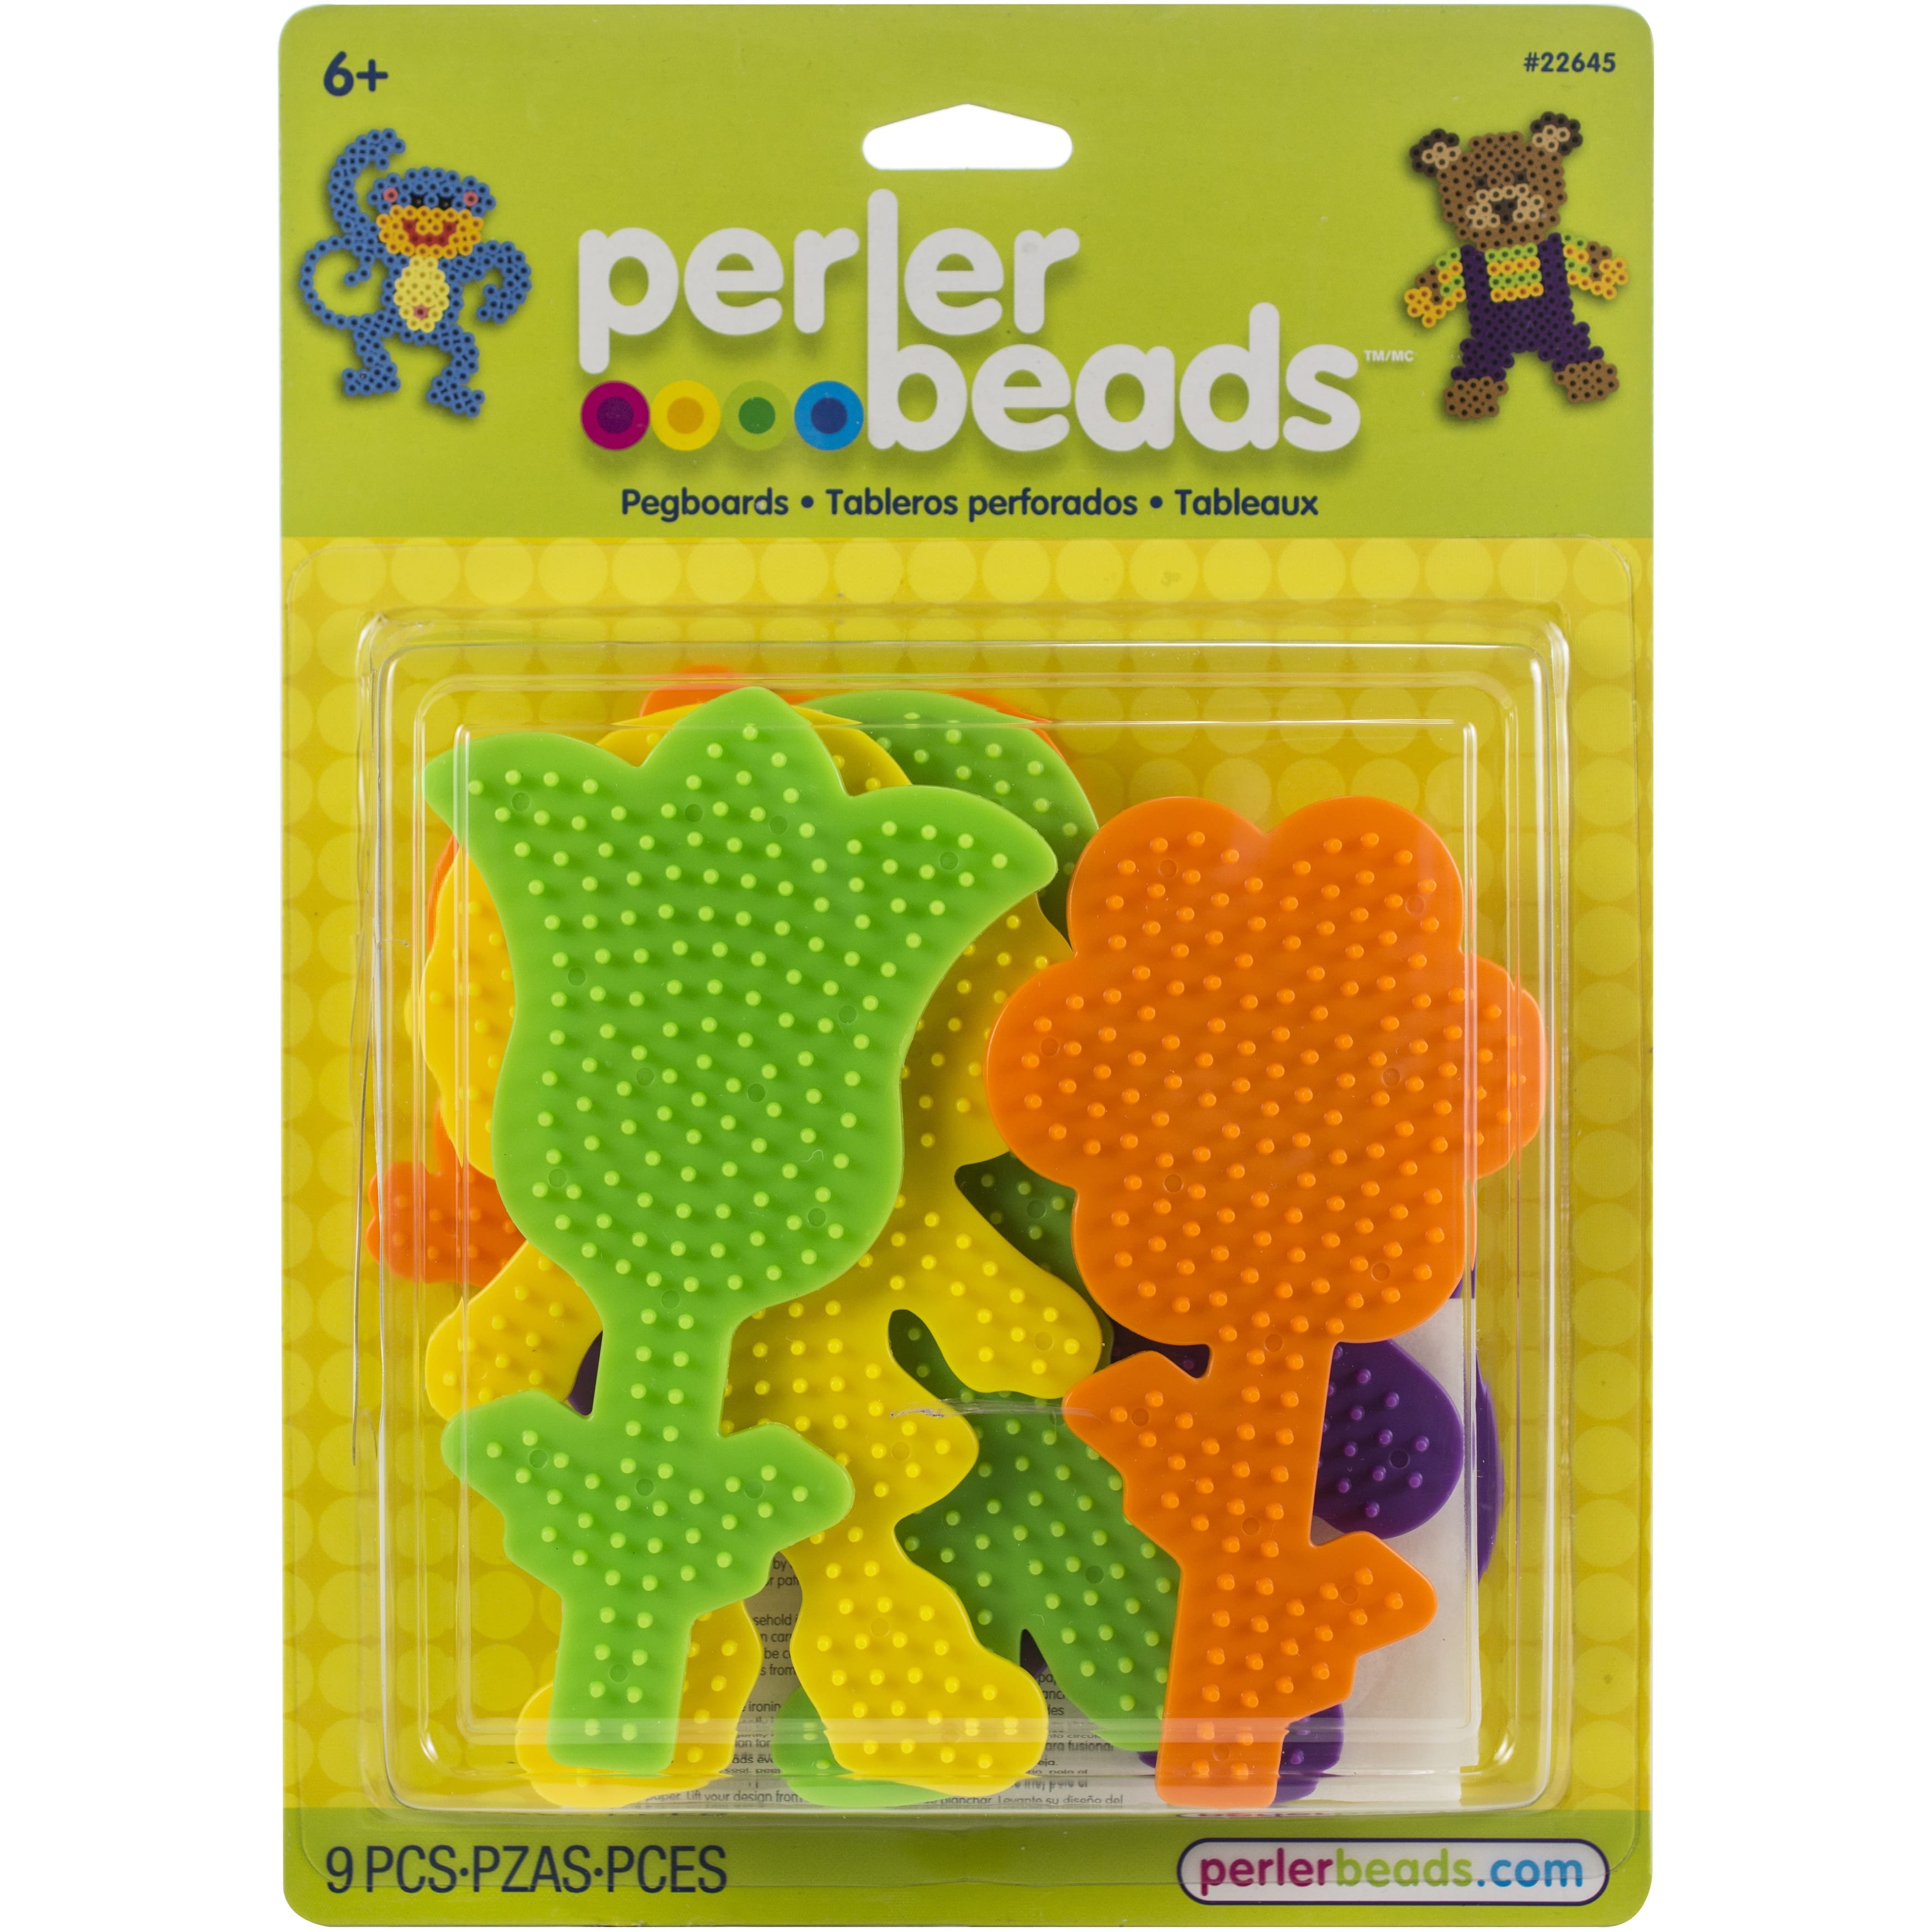 Perler Beads Funfusion Pegboard, Clear, L - 2 pack